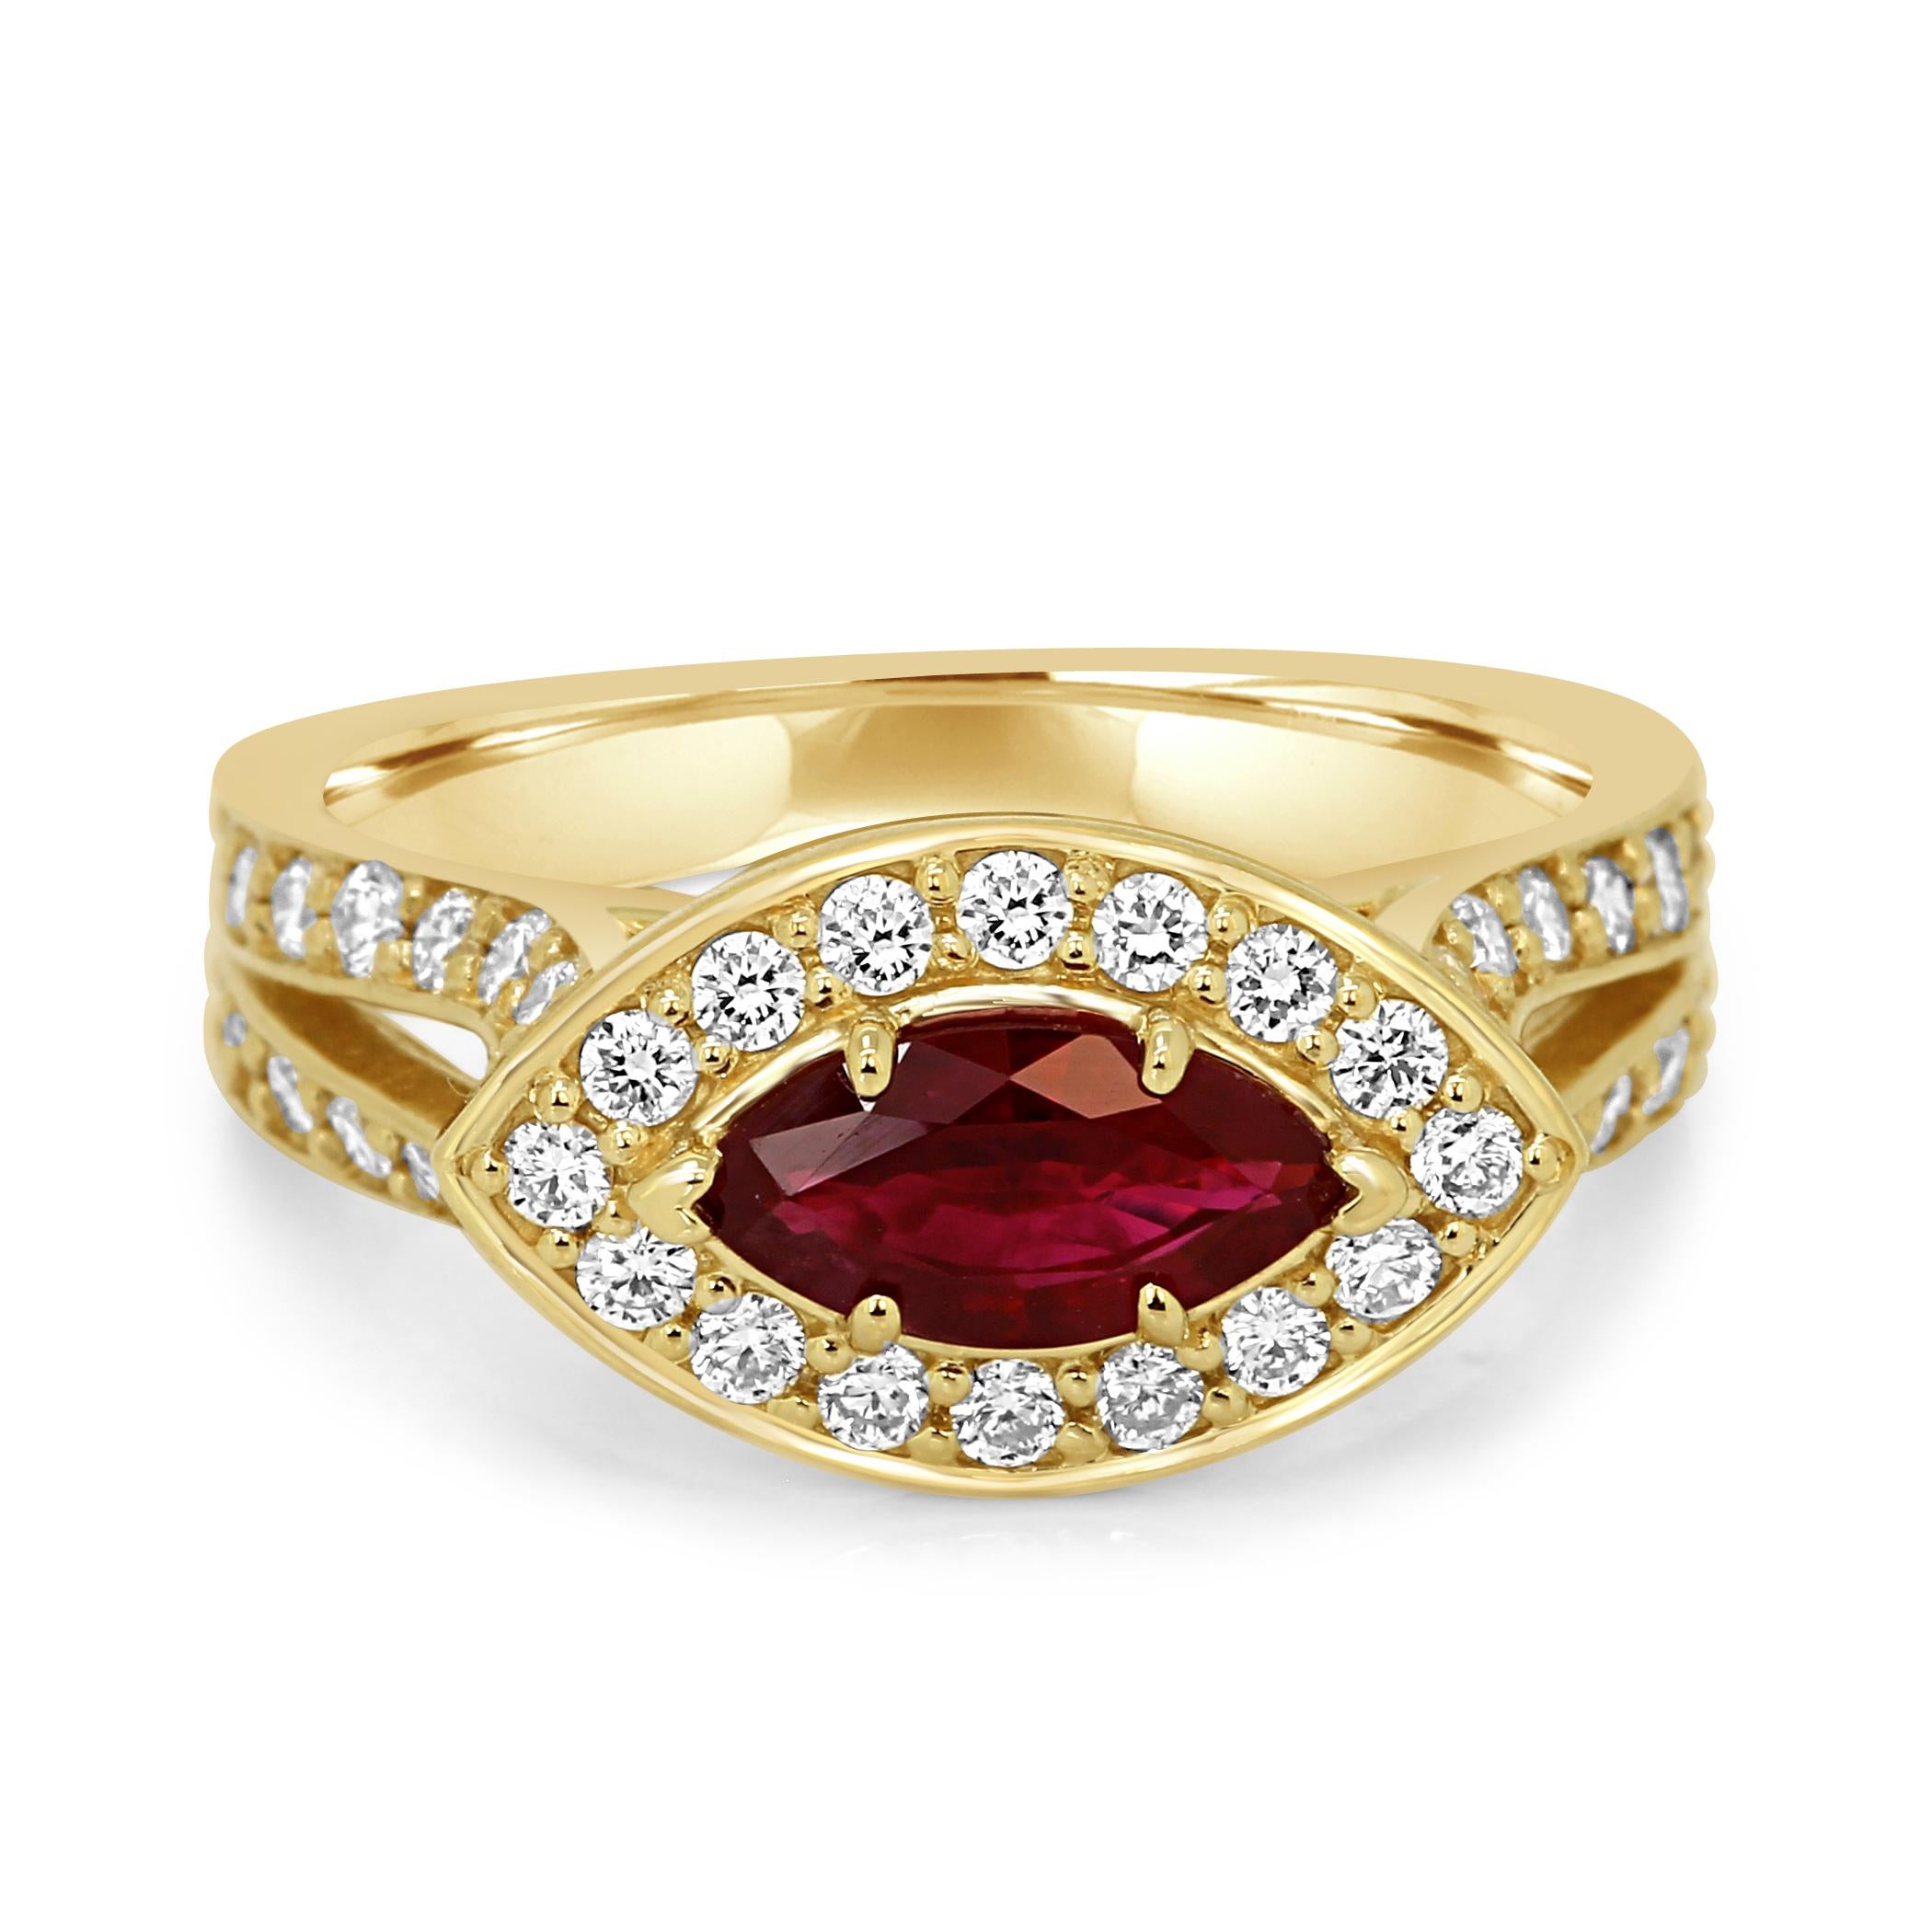 Beautiful Ruby Marquise 0.85 Carat Set in East West Direction adorned with a single Halo of White Round Diamonds 0.71 Carat in Diamond Studded split shank 14K Yellow Gold Bridal Fashion Ring.

Style available in different price ranges. Prices are